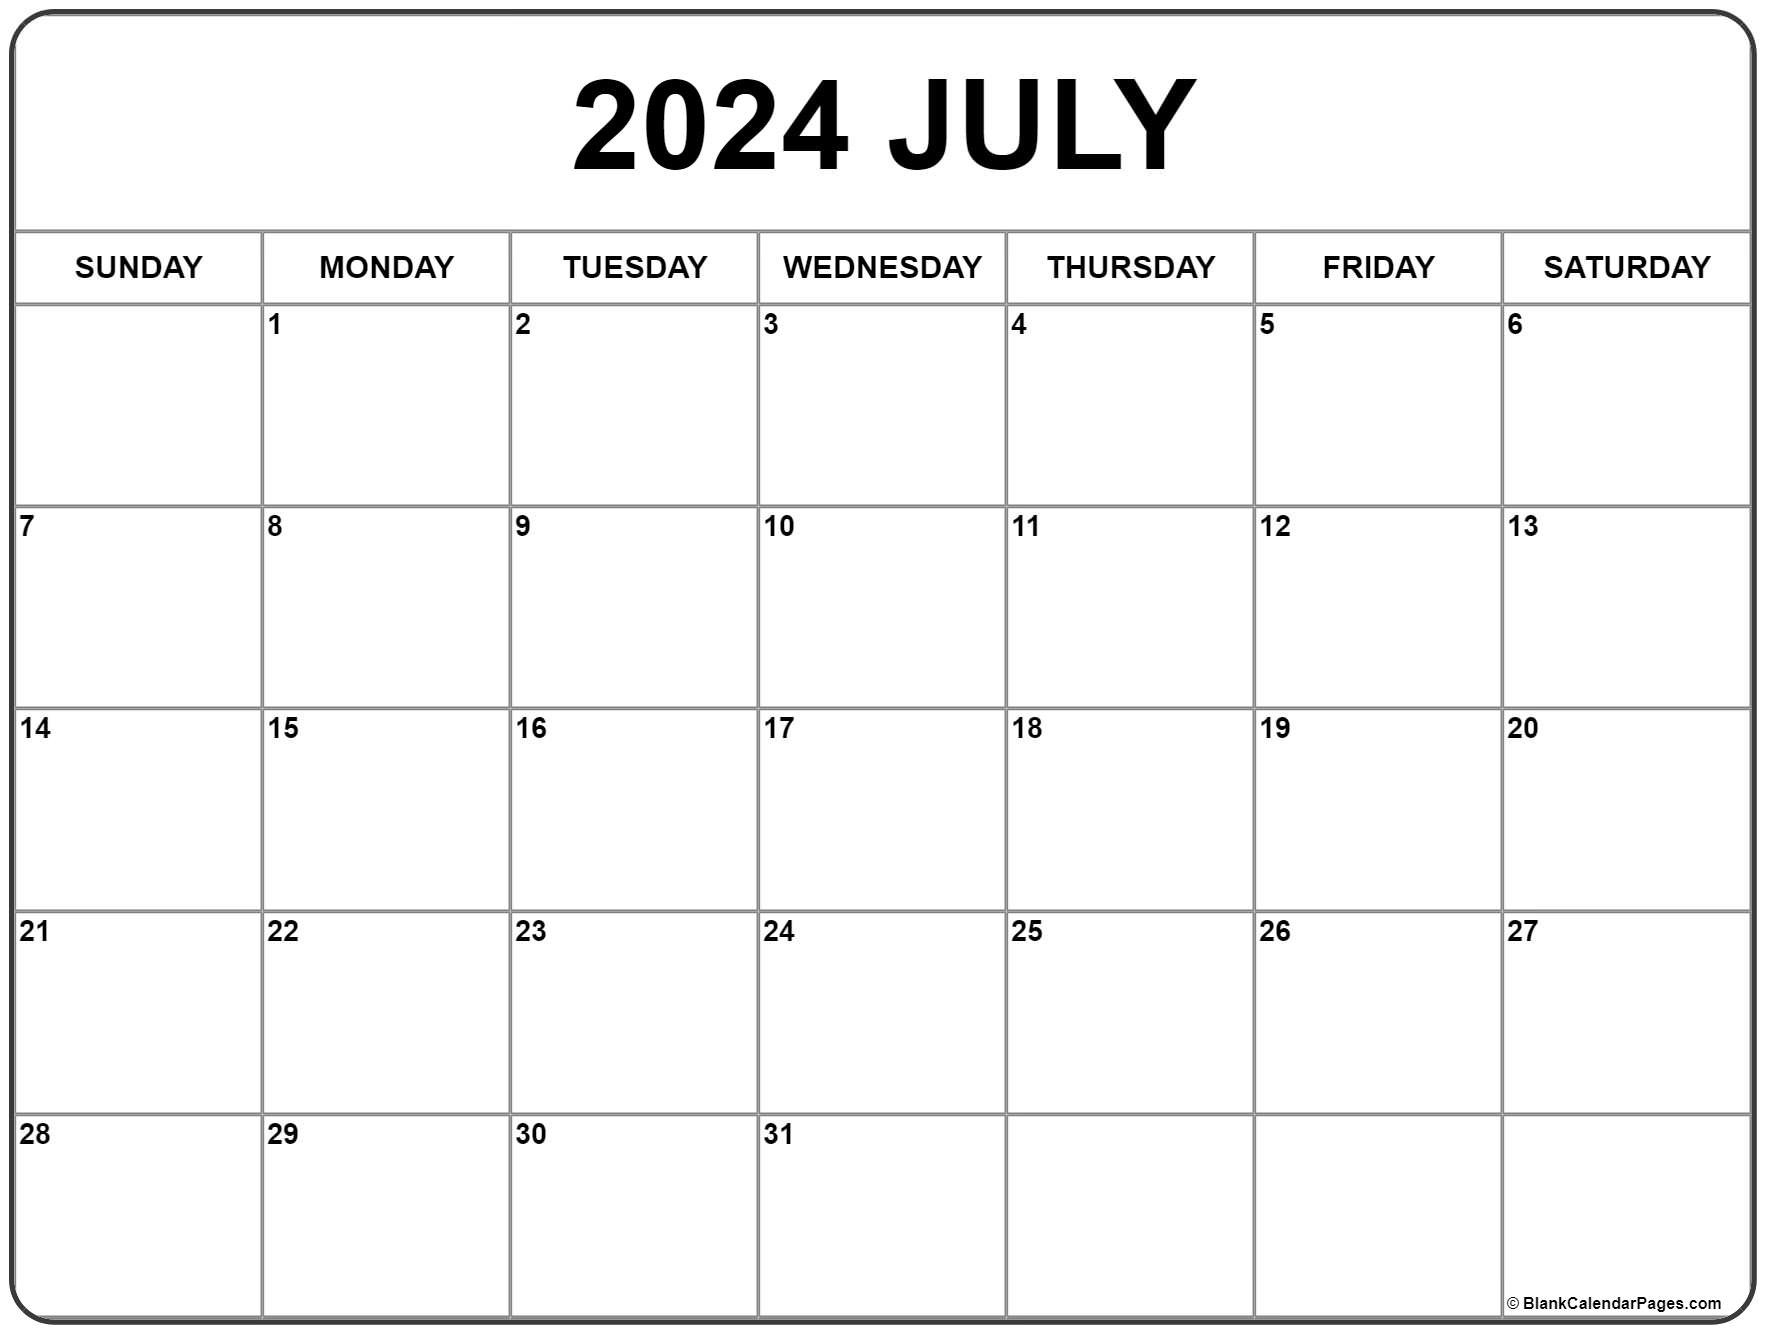 Calendar May June July 2024 Schedule Carly Crissie - Free Printable 2024 Monthly Calendar July